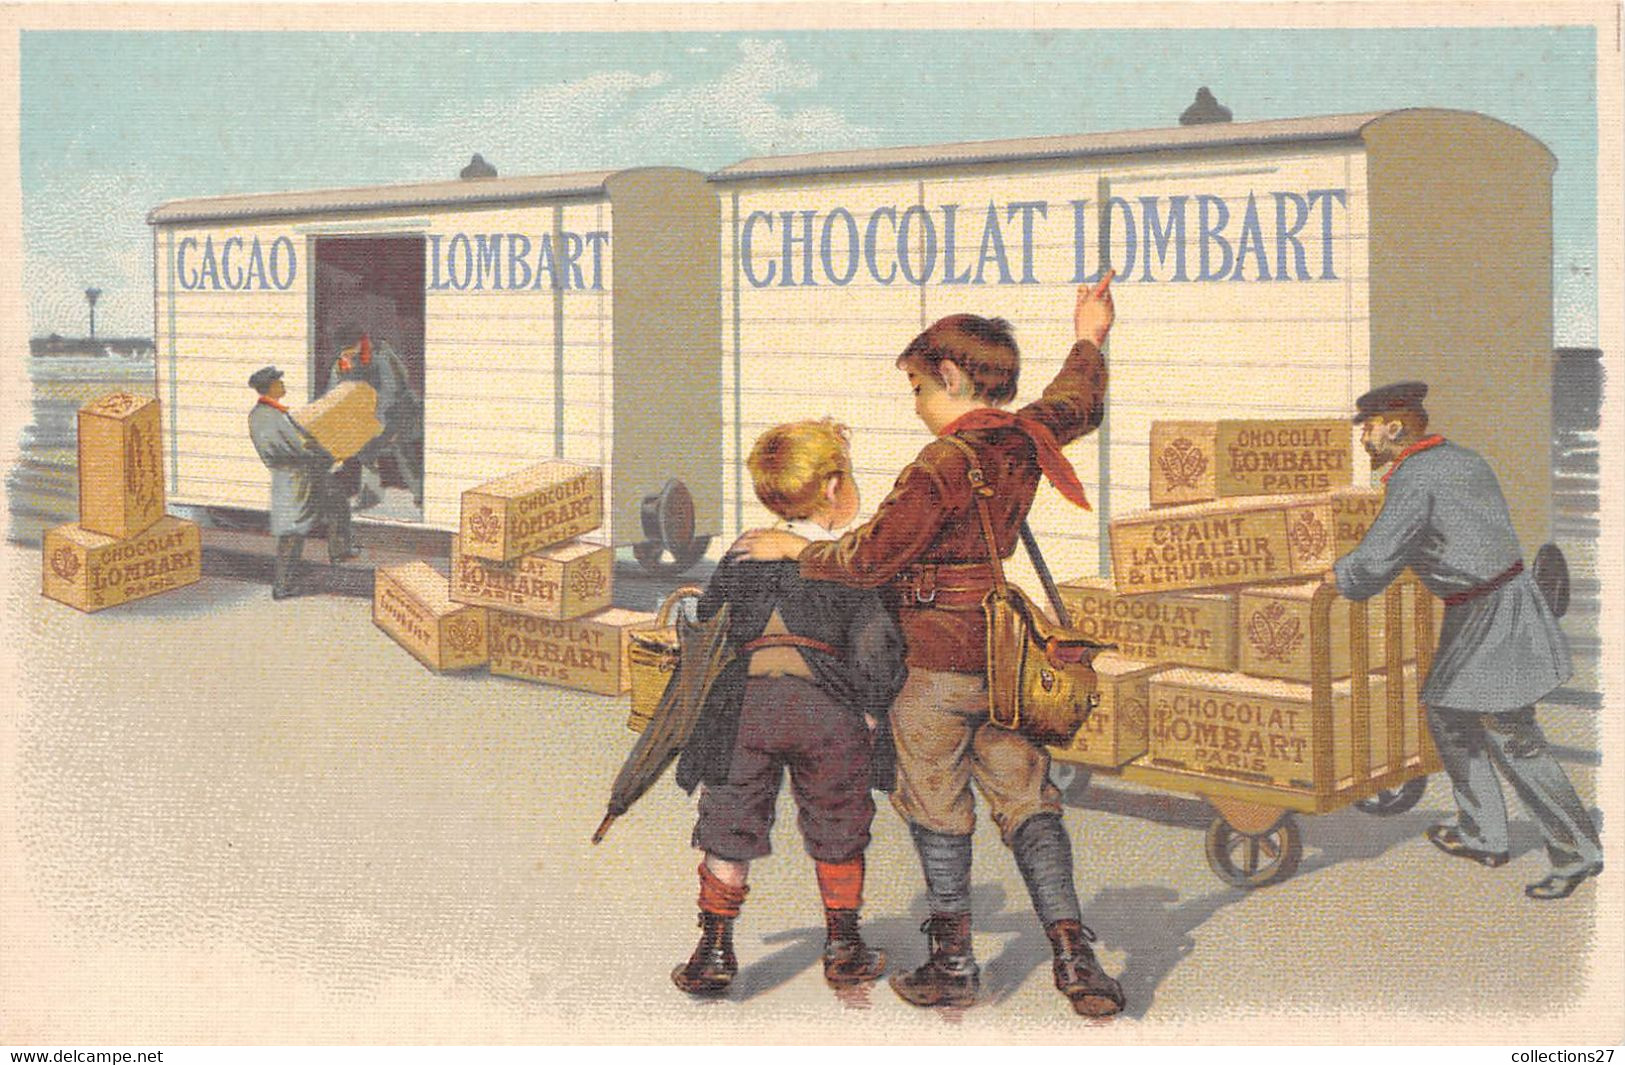 CACAO LOMBART - CHOCOLAT LOMBART - Advertising